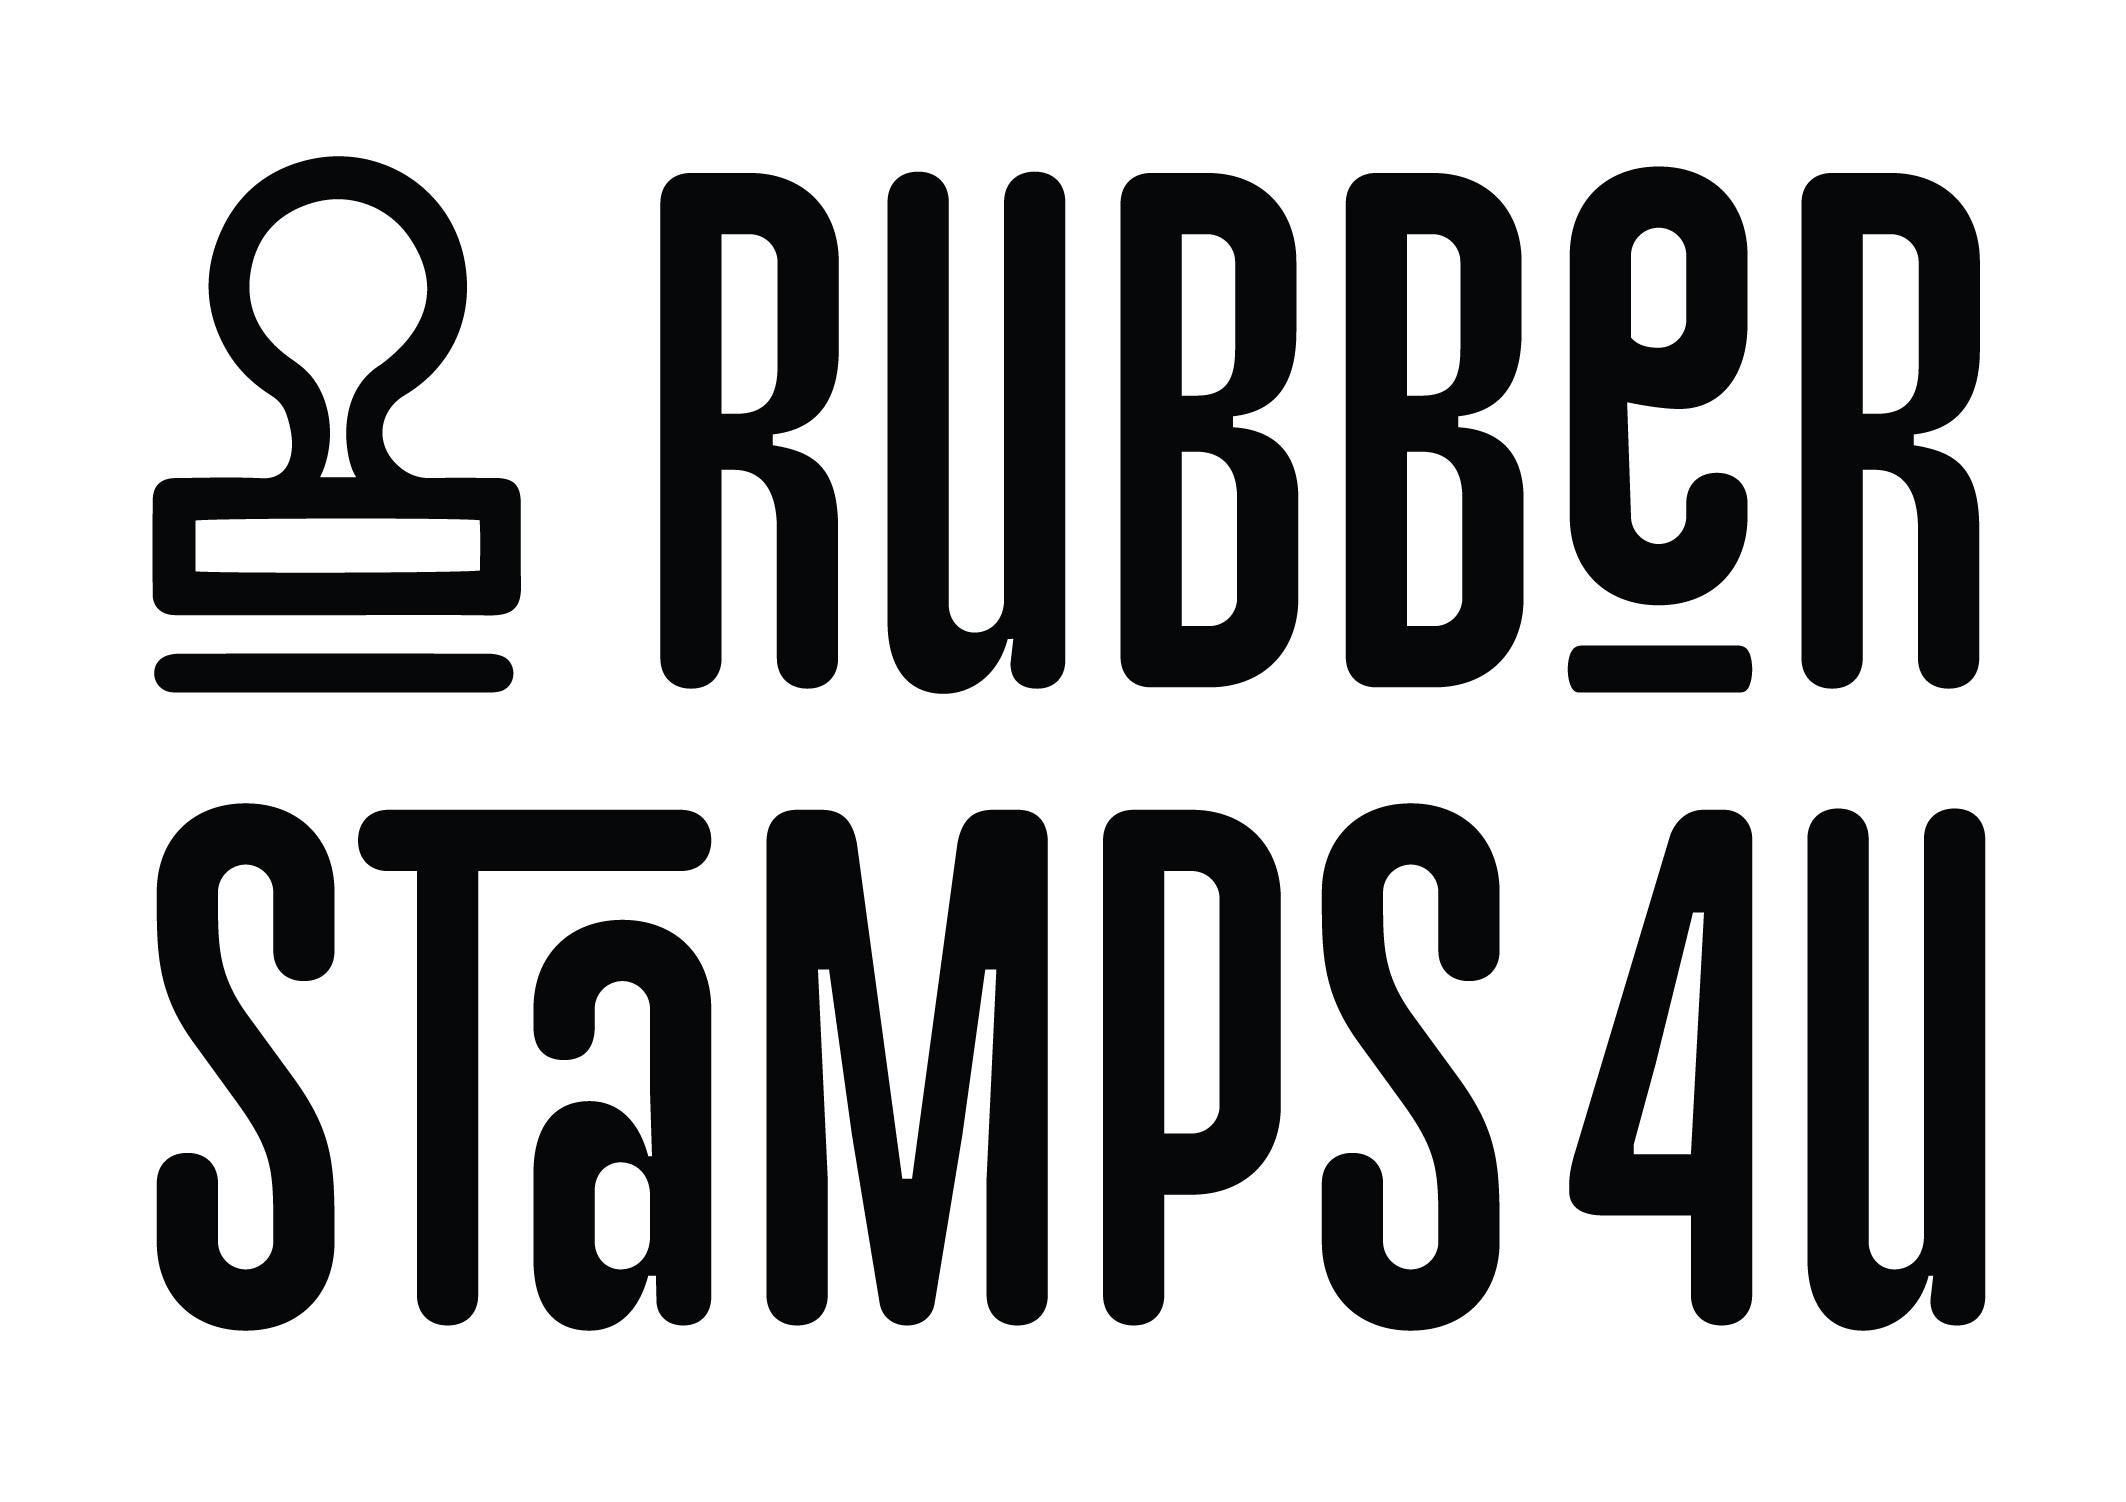 Rubber Stamps 4U - Custom Rubber Stamps and Laser Engraving